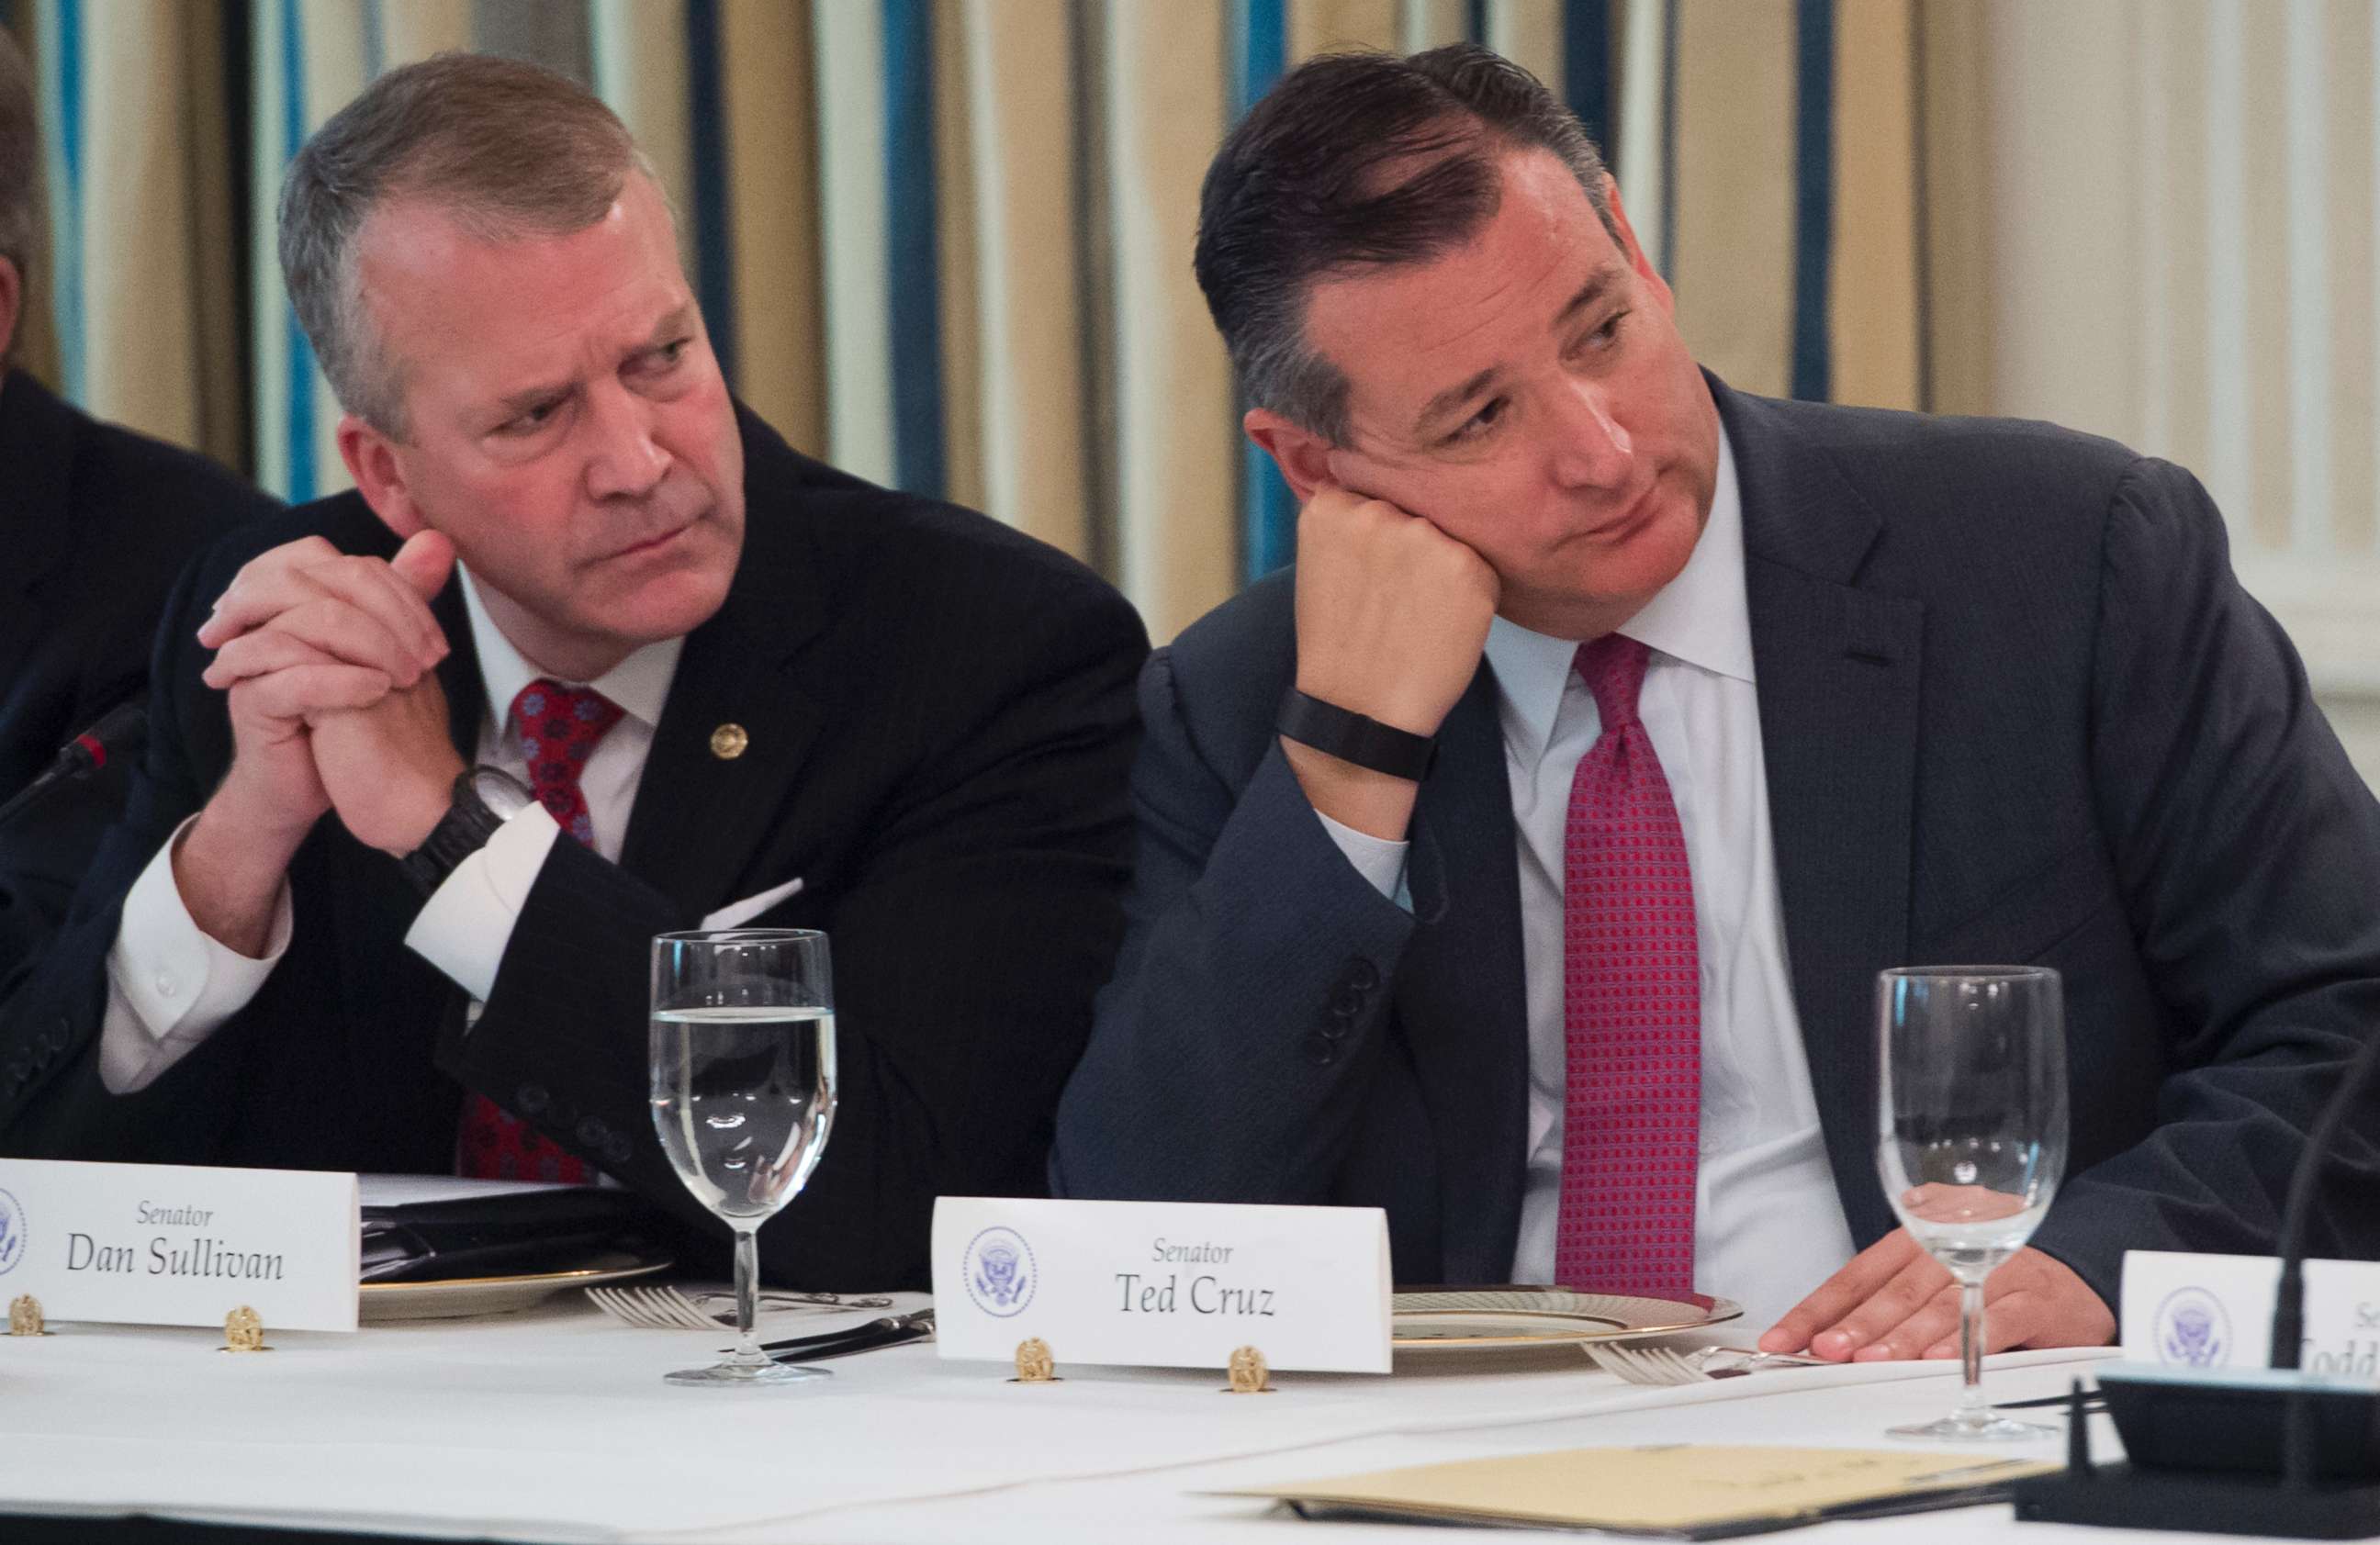 PHOTO: Senators Ted Cruz and Dan Sullivan listen as President Donald Trump speaks during a meeting with Republican Senators to discuss the health care bill in the State Dining Room of the White House in Washington, July 19, 2017.